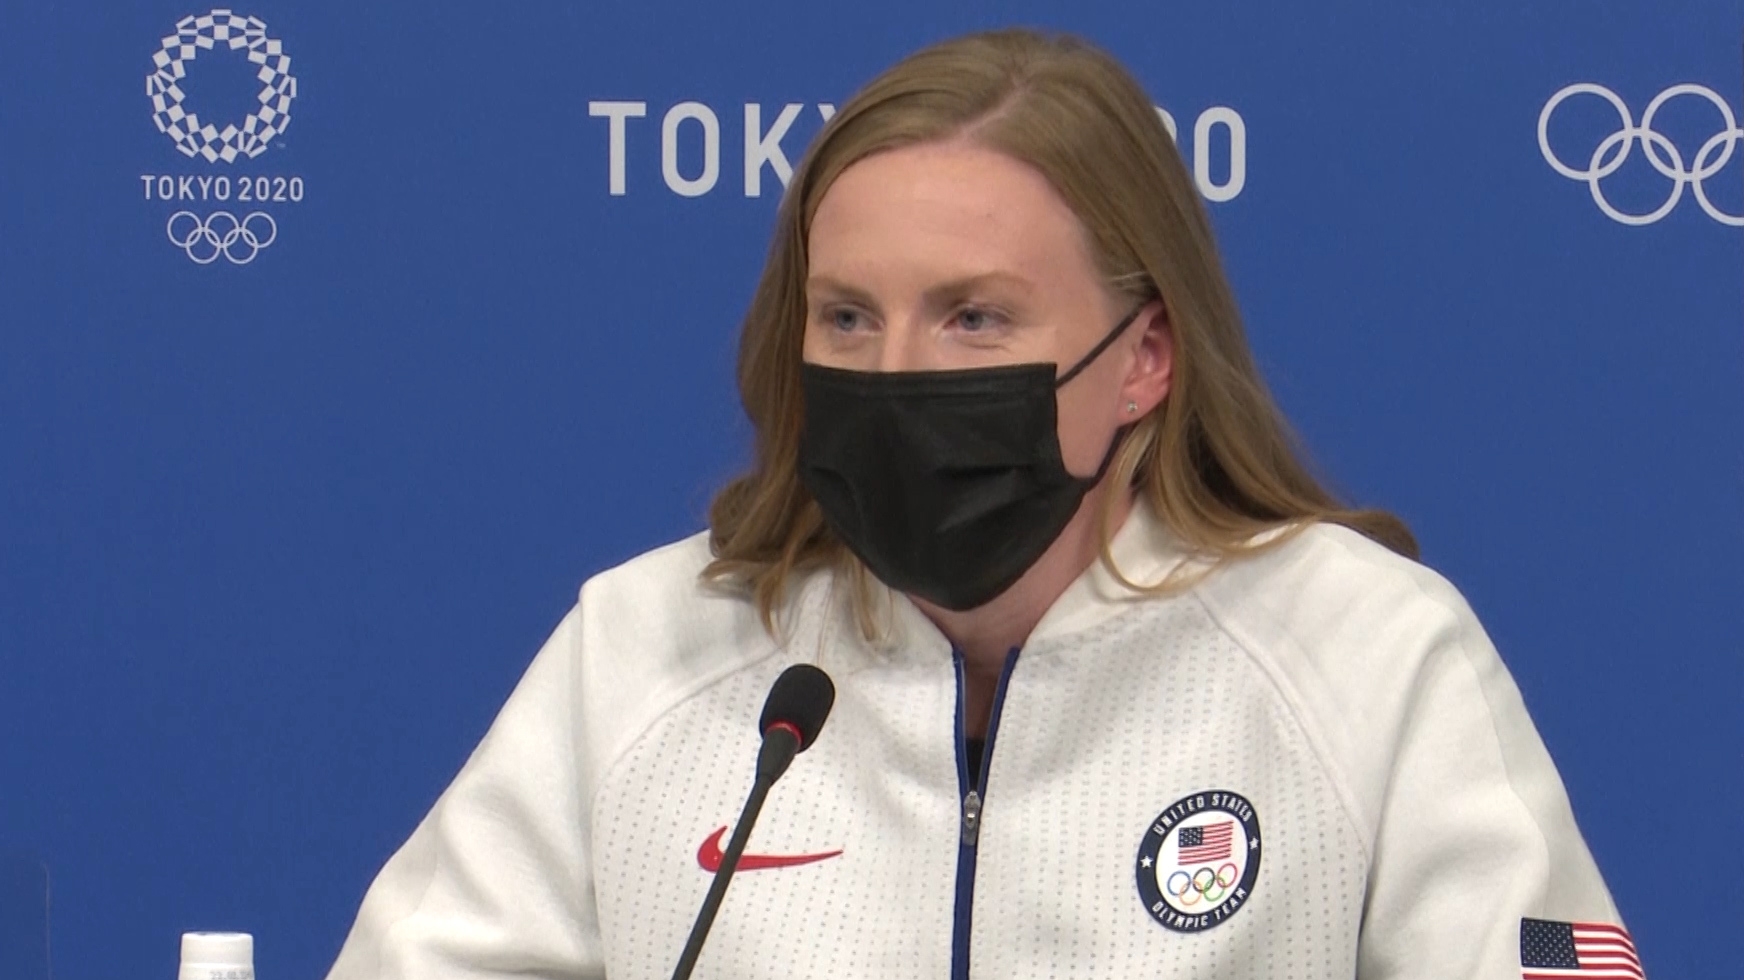 U.S. swimmer King implies Russian athletes shouldn't be in Toyko